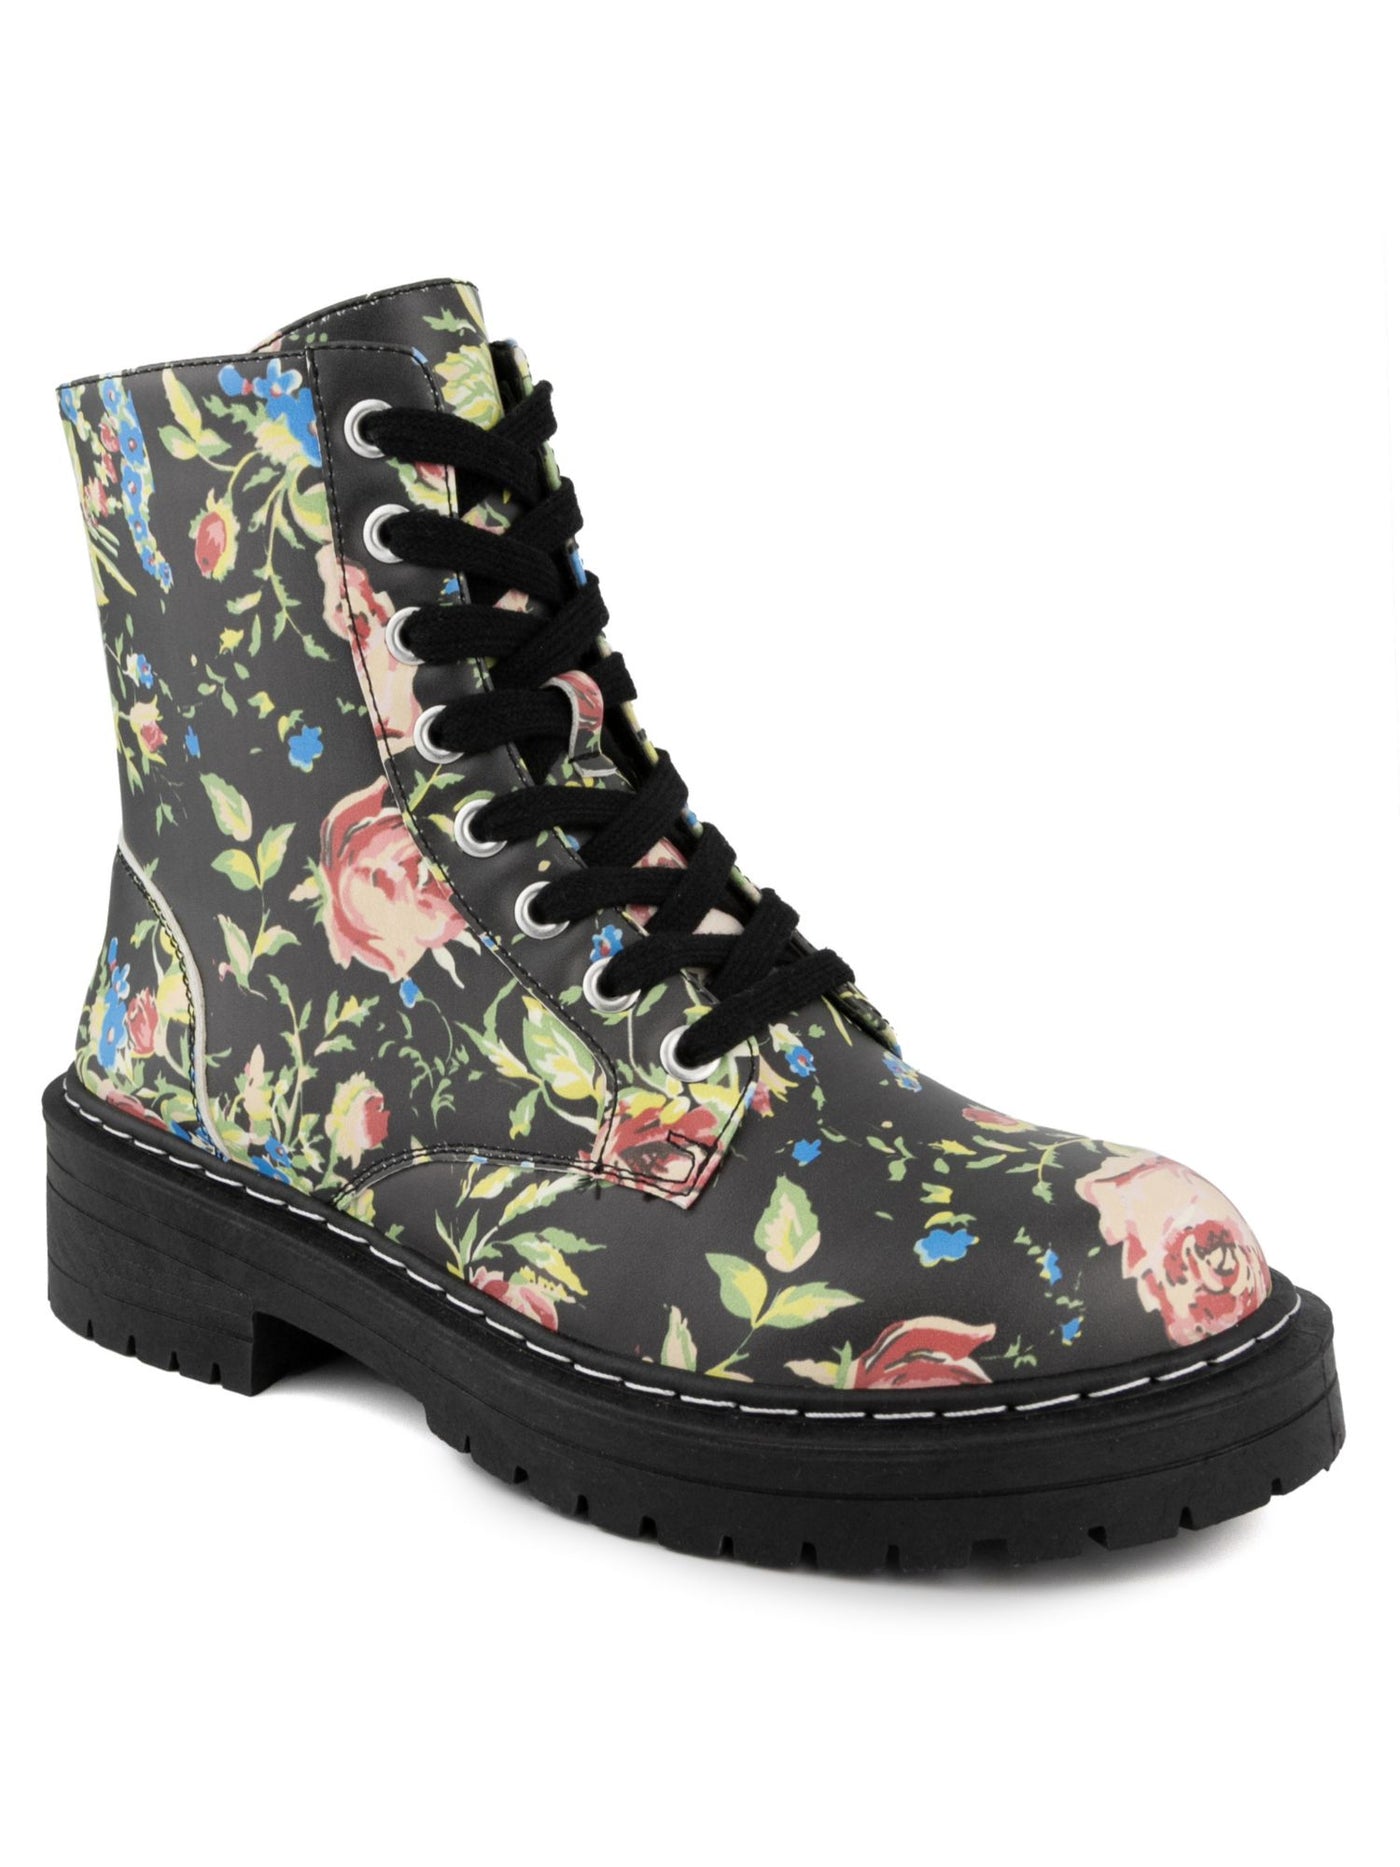 SUGAR Womens Black Floral Lace-Up Front Stitch Detailing Cushioned Kaedy Round Toe Block Heel Zip-Up Combat Boots 6 M